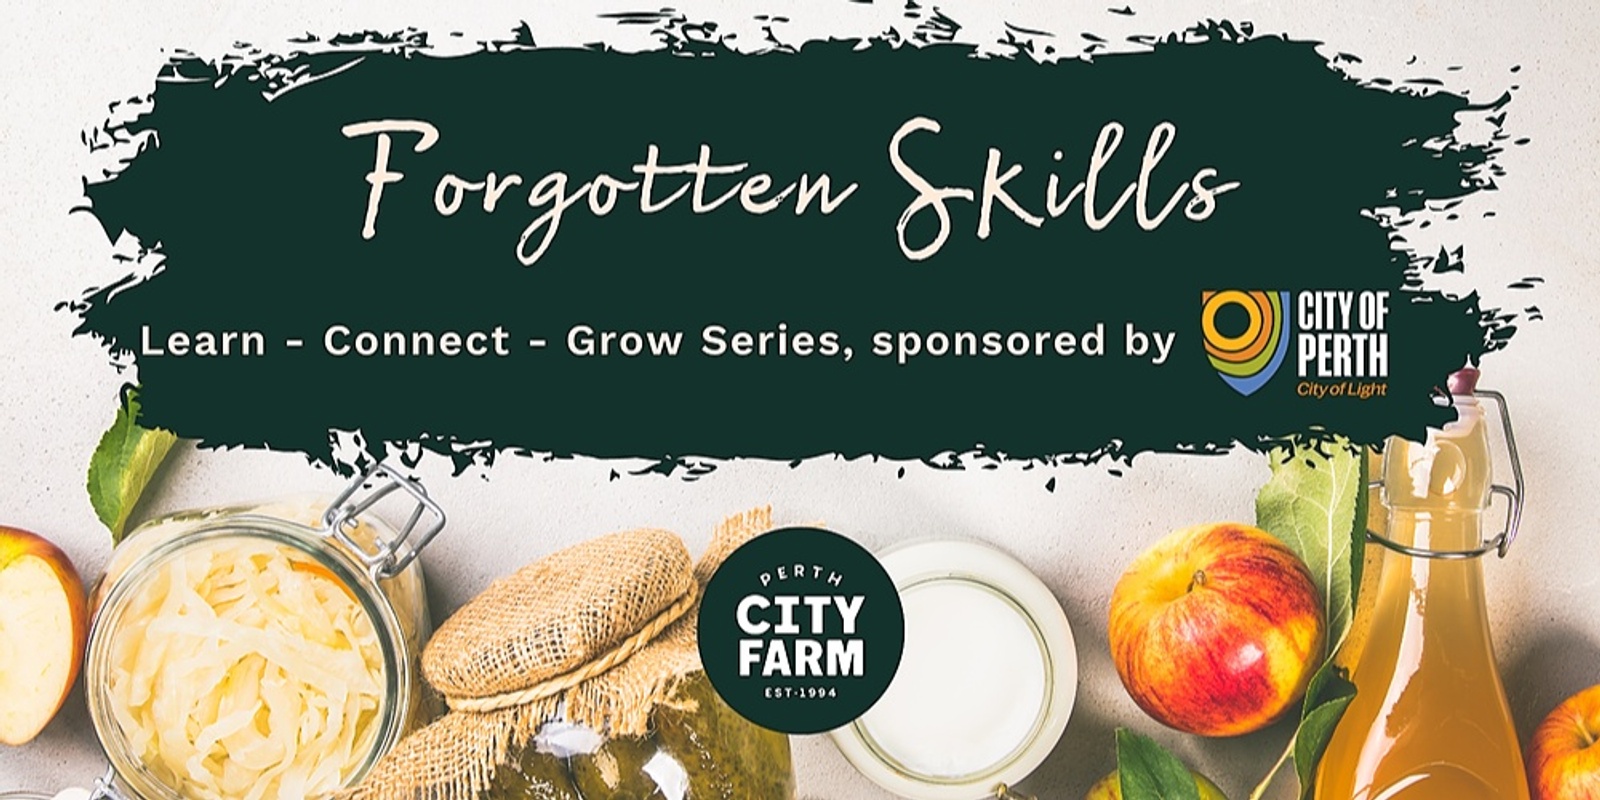 Learn Connect Grow Series: Forgotten Skills